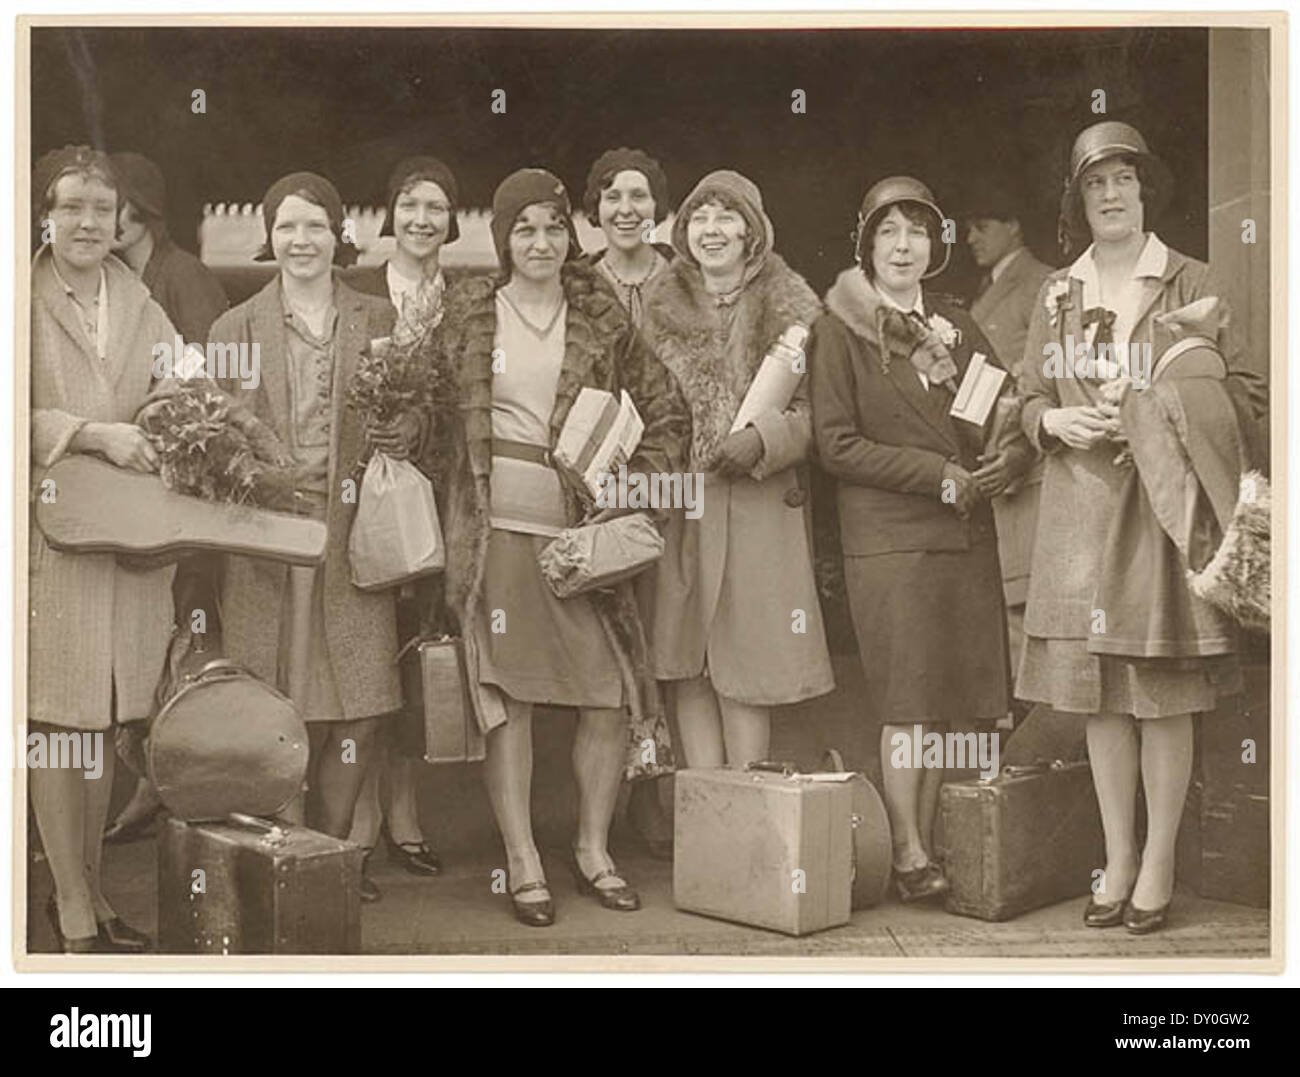 American women's jazz band 'Ingenues', Central Station, Sydney, late 1920's / Sam Hood Stock Photo